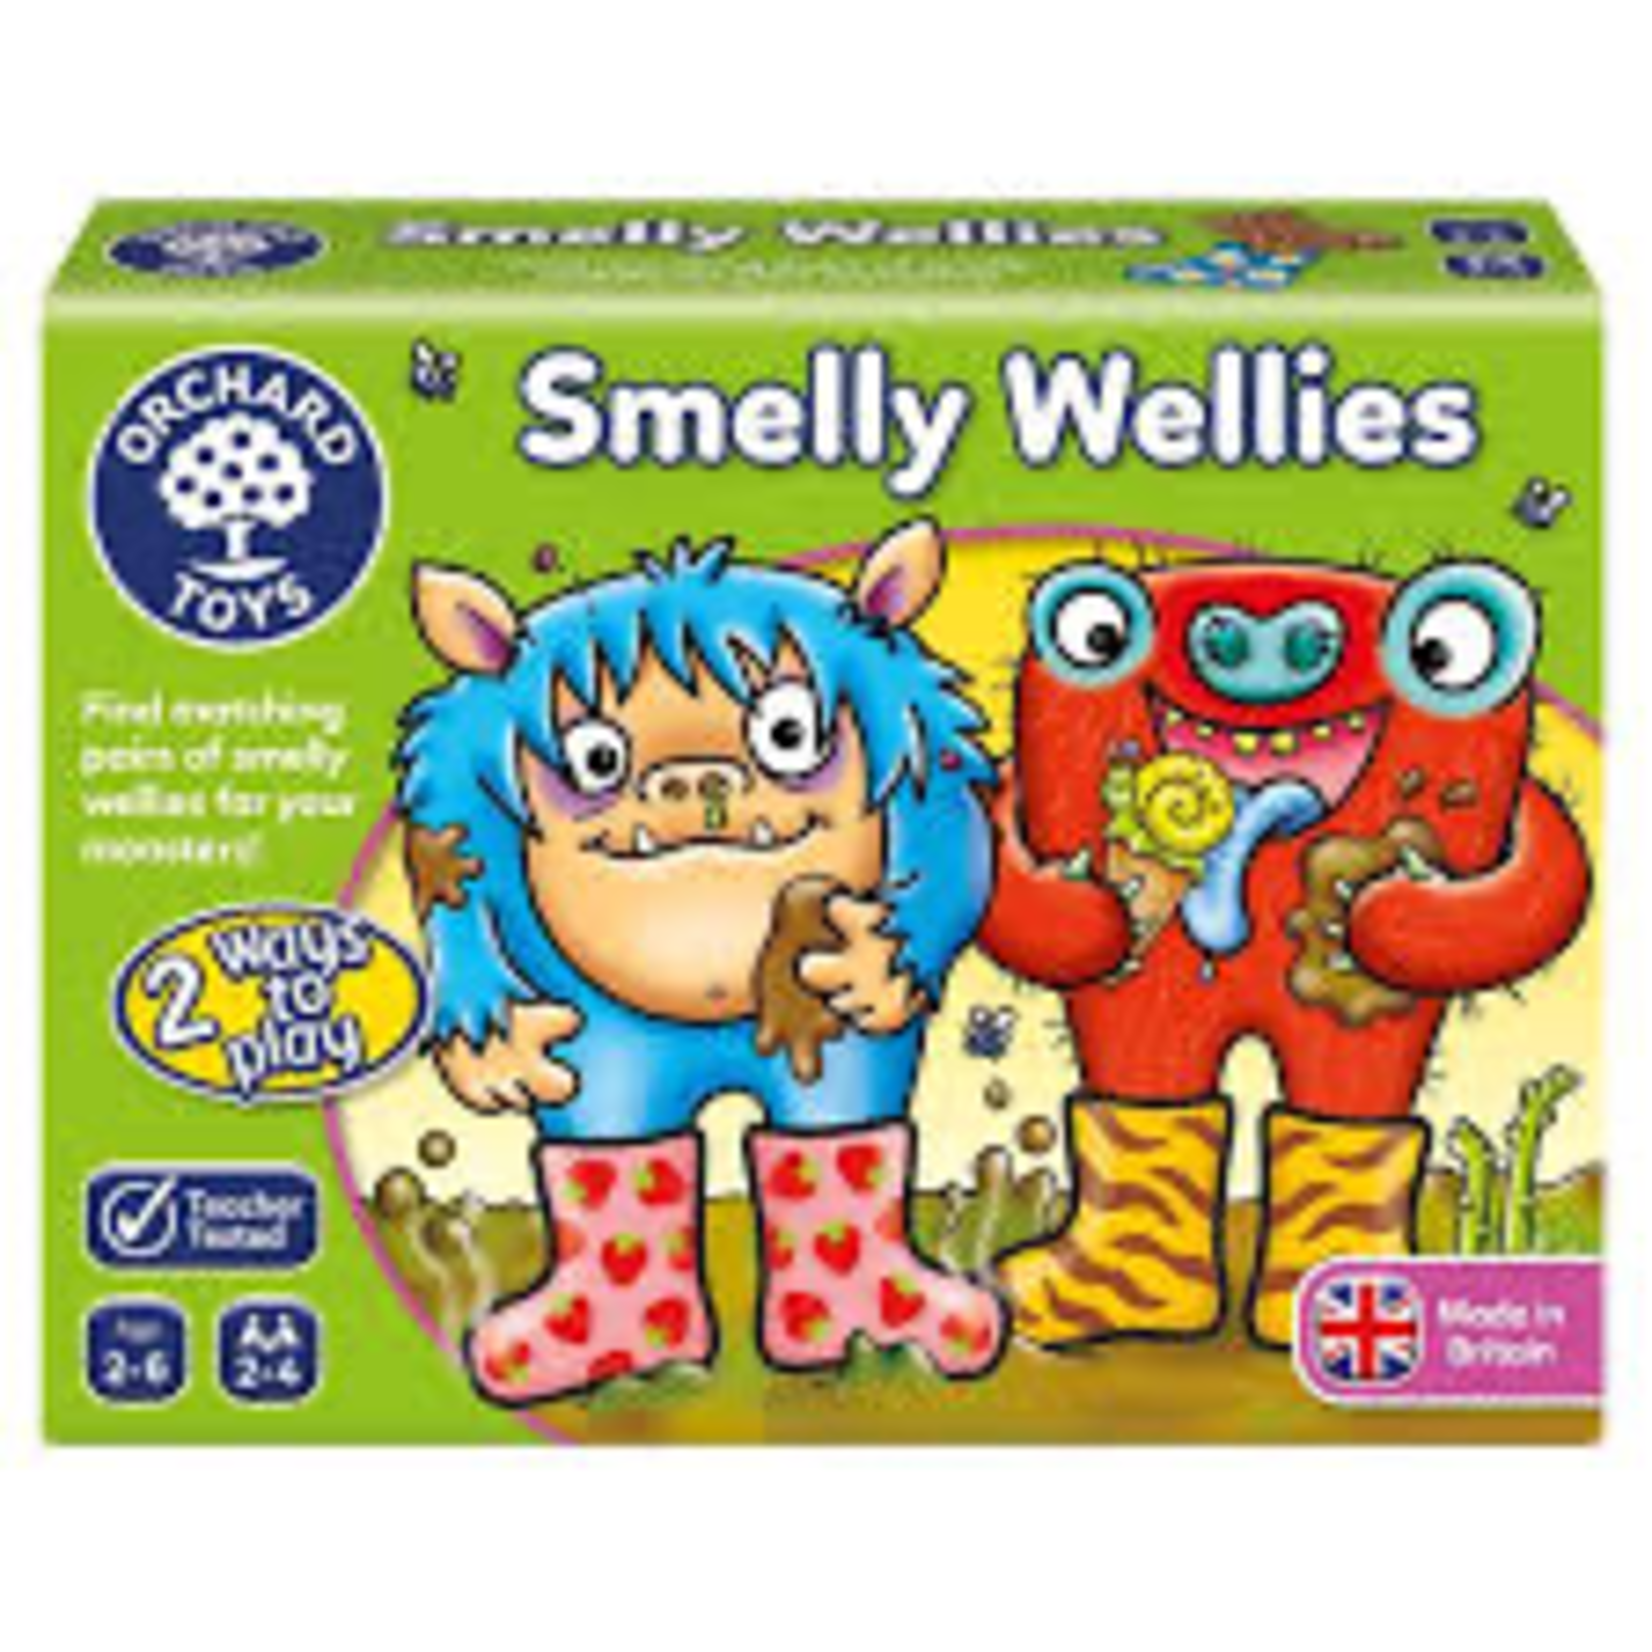 Orchard Toys Smelly Wellies